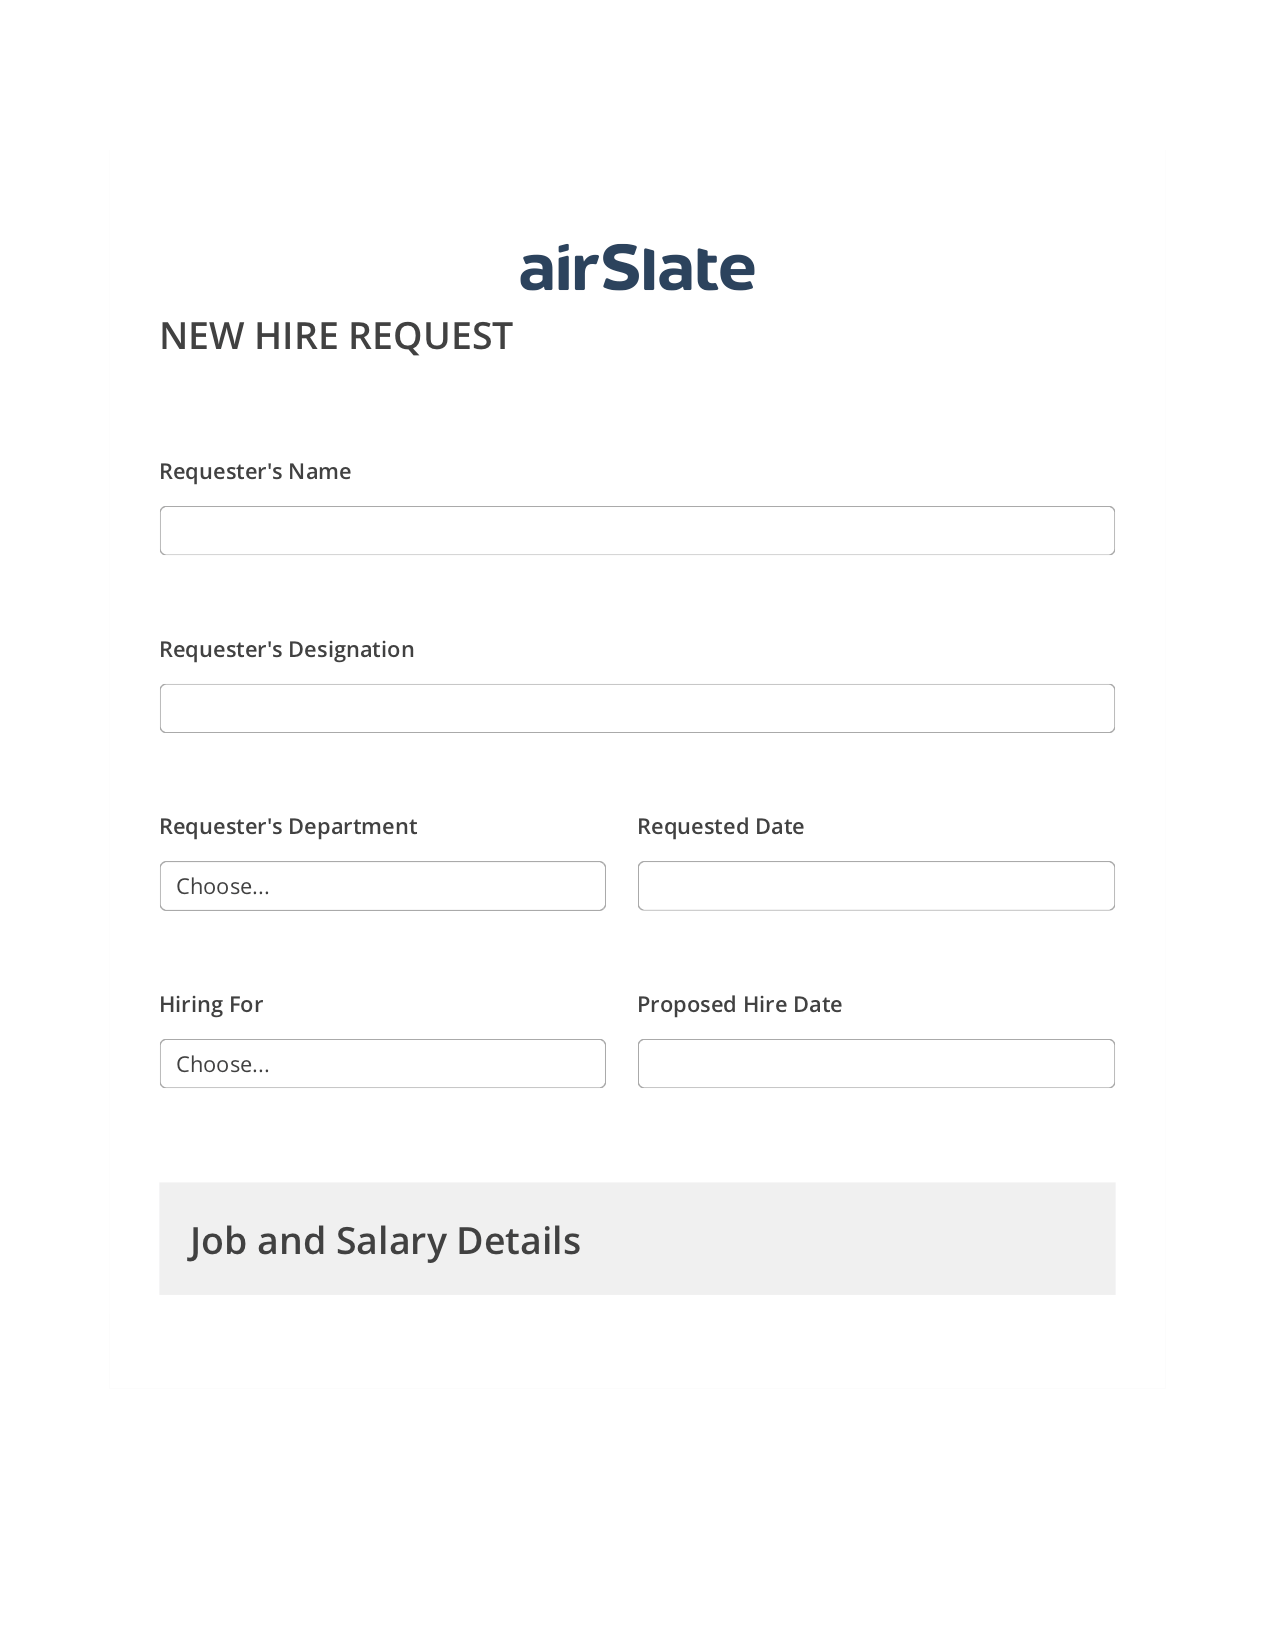 Hiring Request Workflow Pre-fill from Litmos bot, Open under a Role Bot, Archive to SharePoint Folder Bot